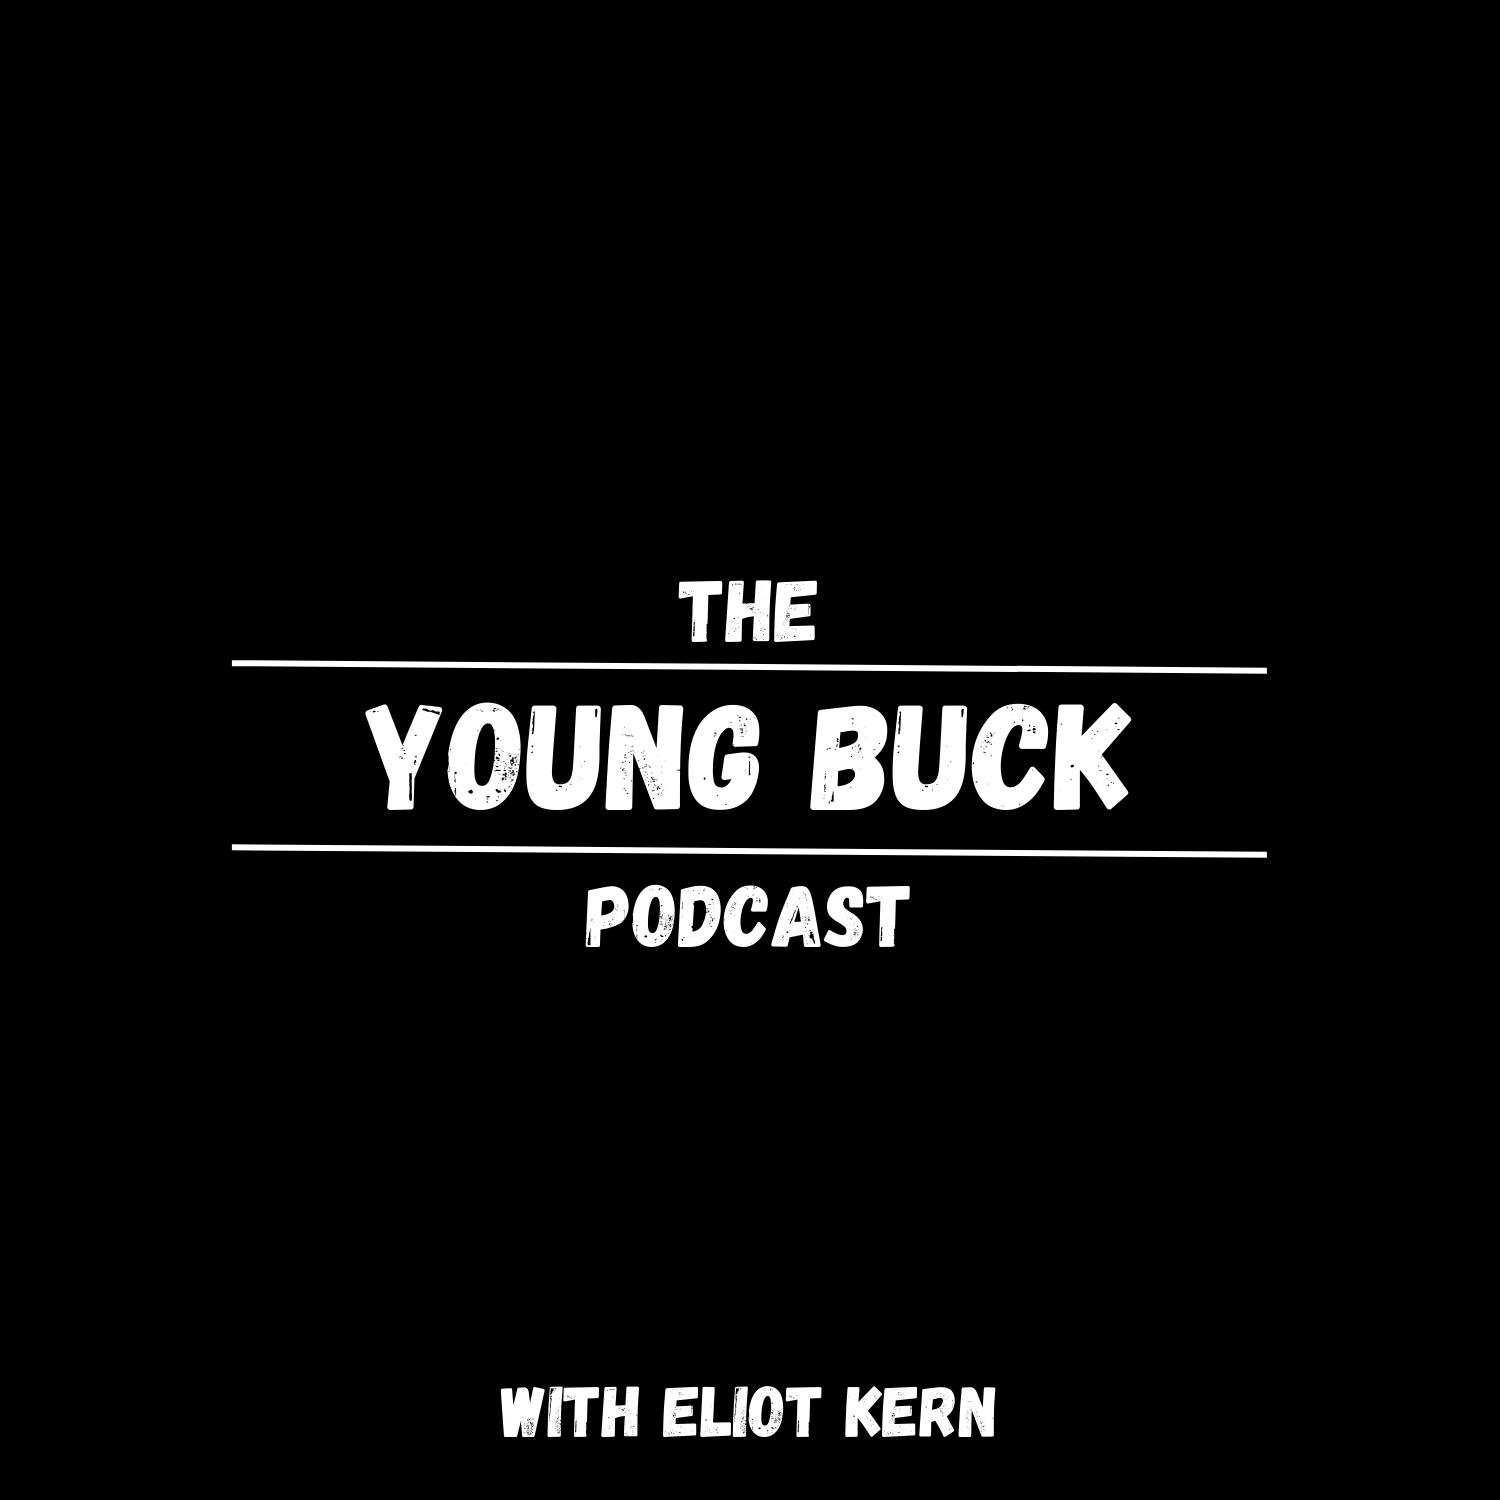 The Young Buck Podcast